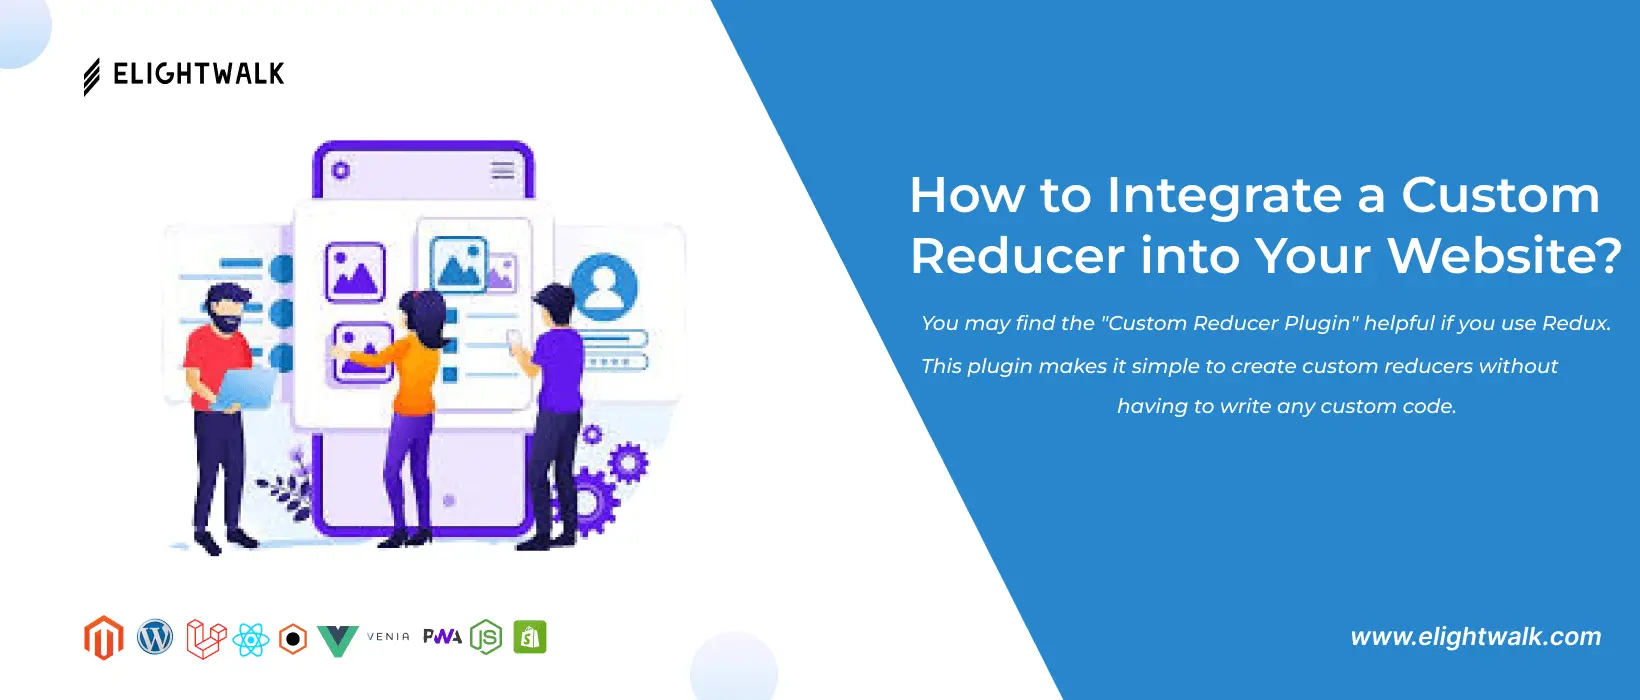 How to Integrate a Custom Reducer into Your Website?